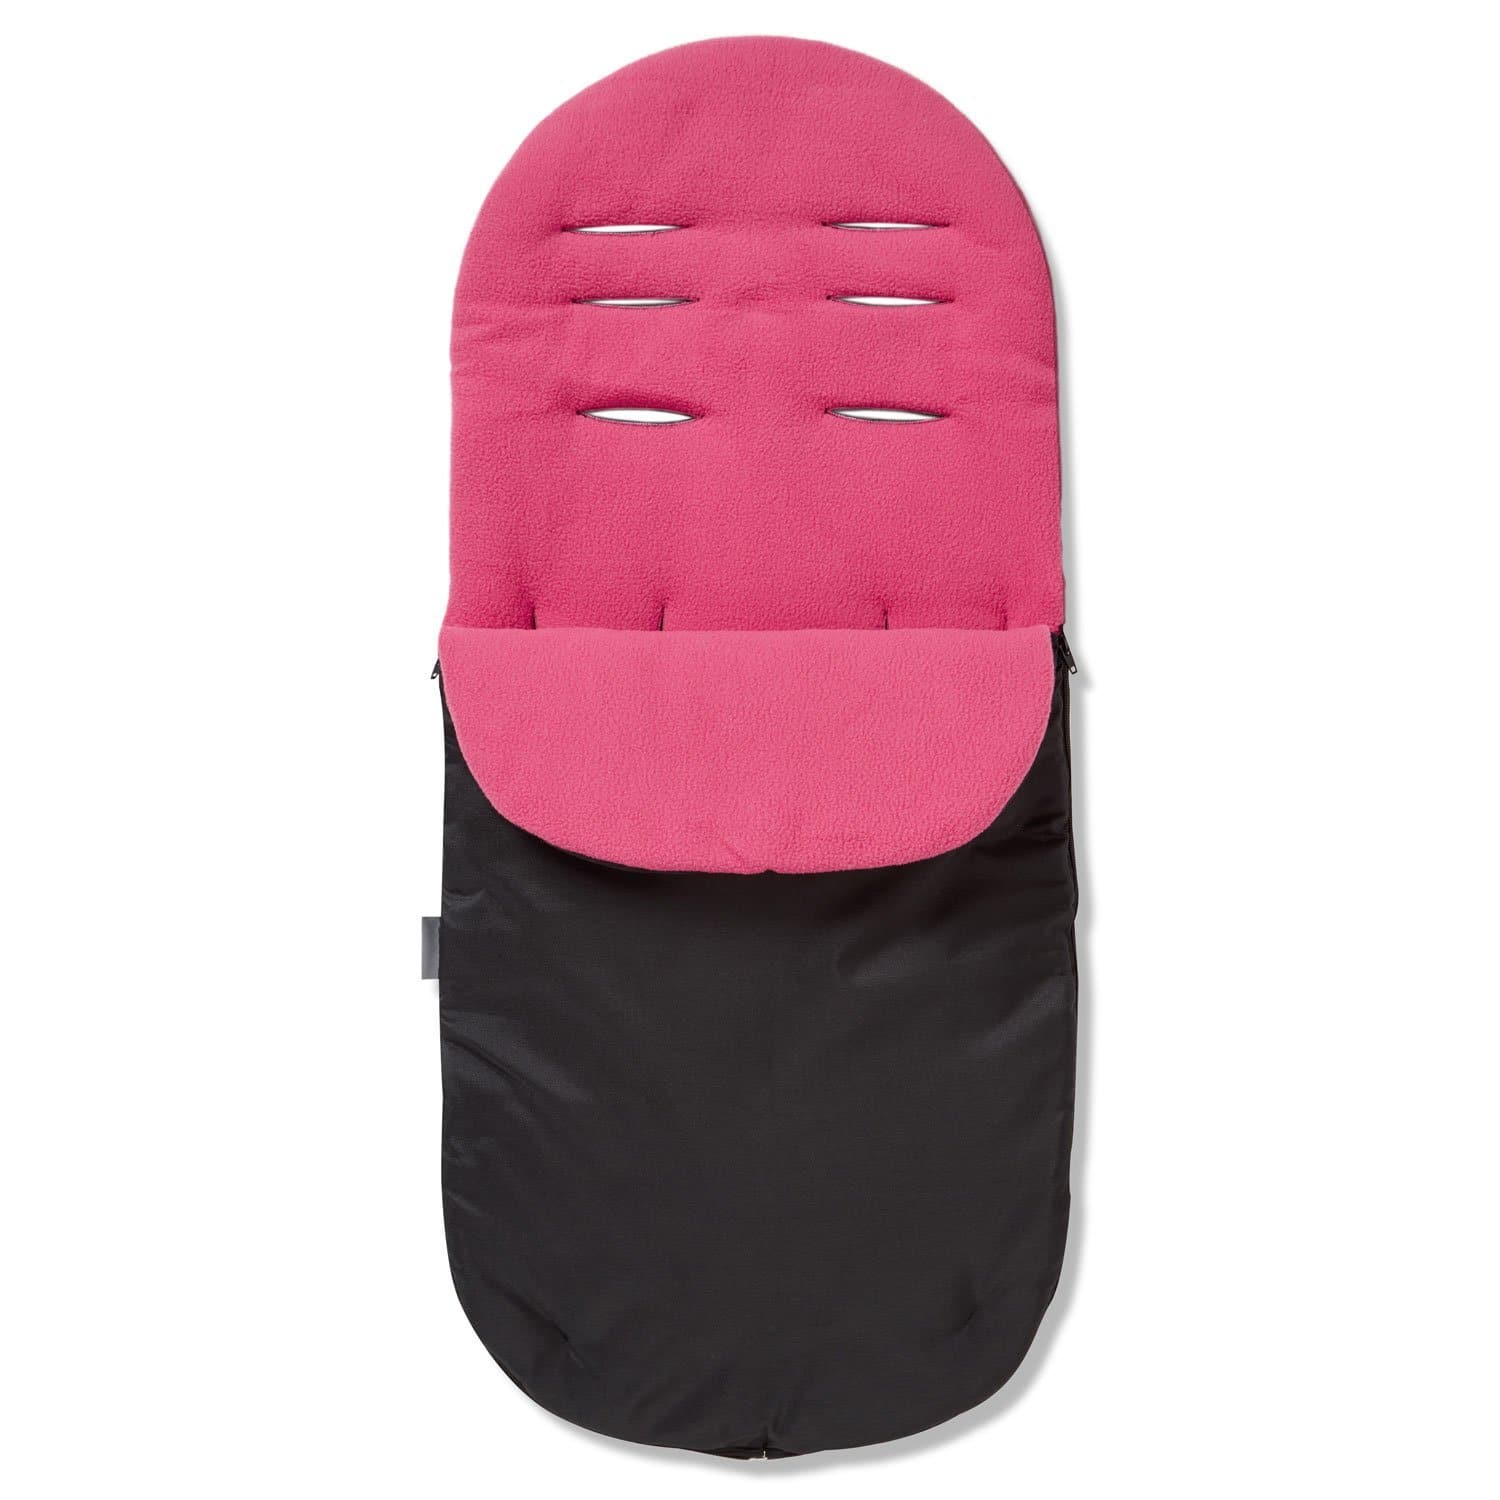 Footmuff / Cosy Toes Compatible with My Child - Dark Pink / Fits All Models | For Your Little One